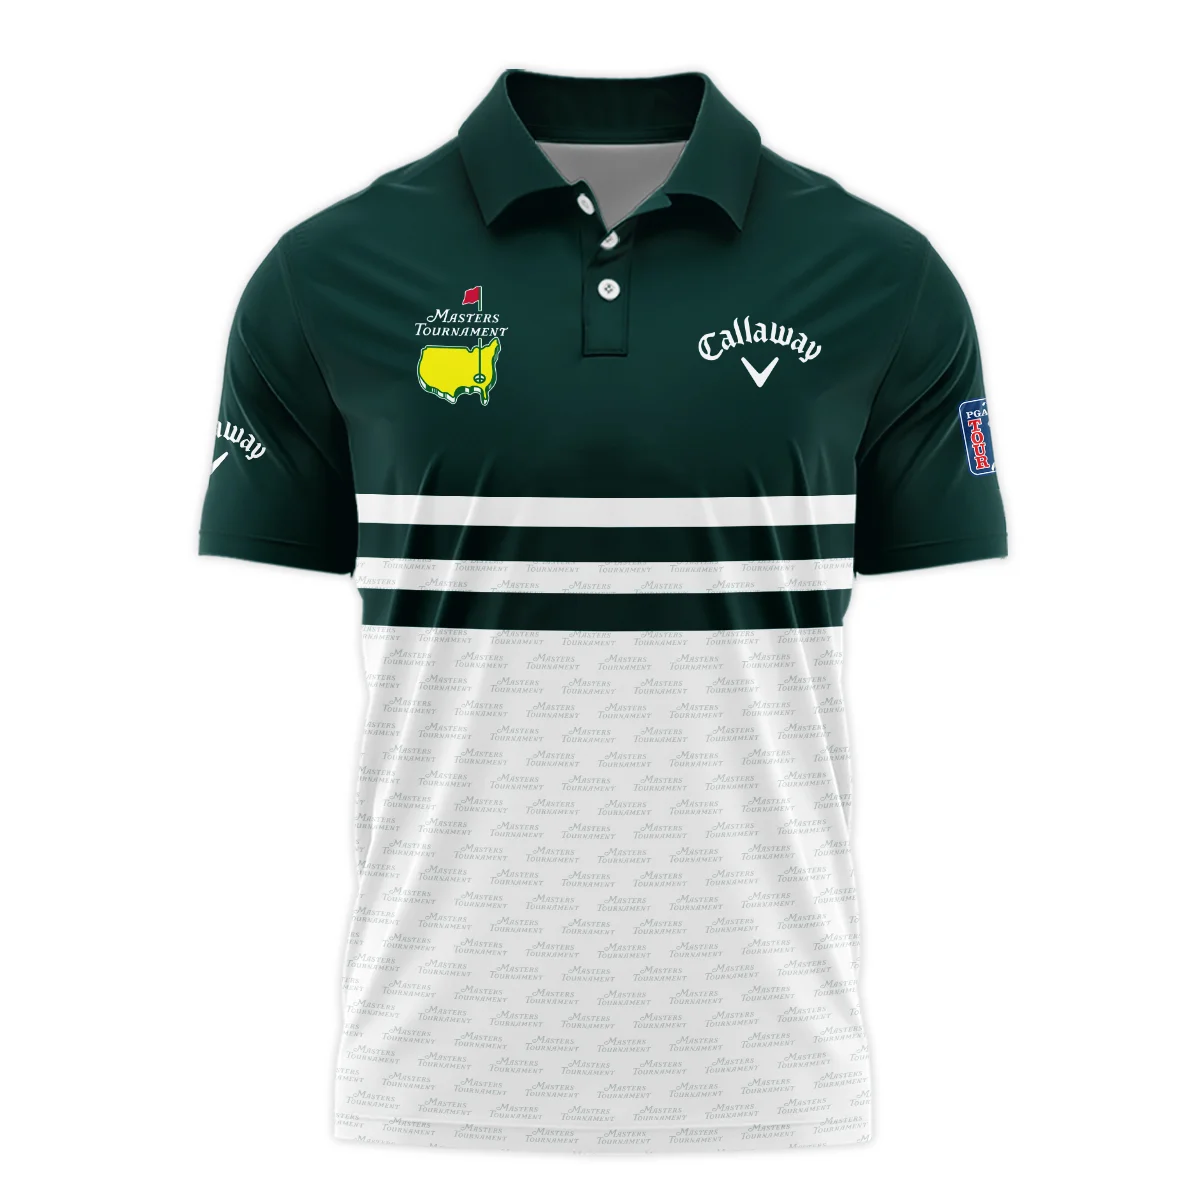 Dark Green Mix White With Logo Pattern Masters Tournament Callaway Vneck Long Polo Shirt Style Classic Long Polo Shirt For Men